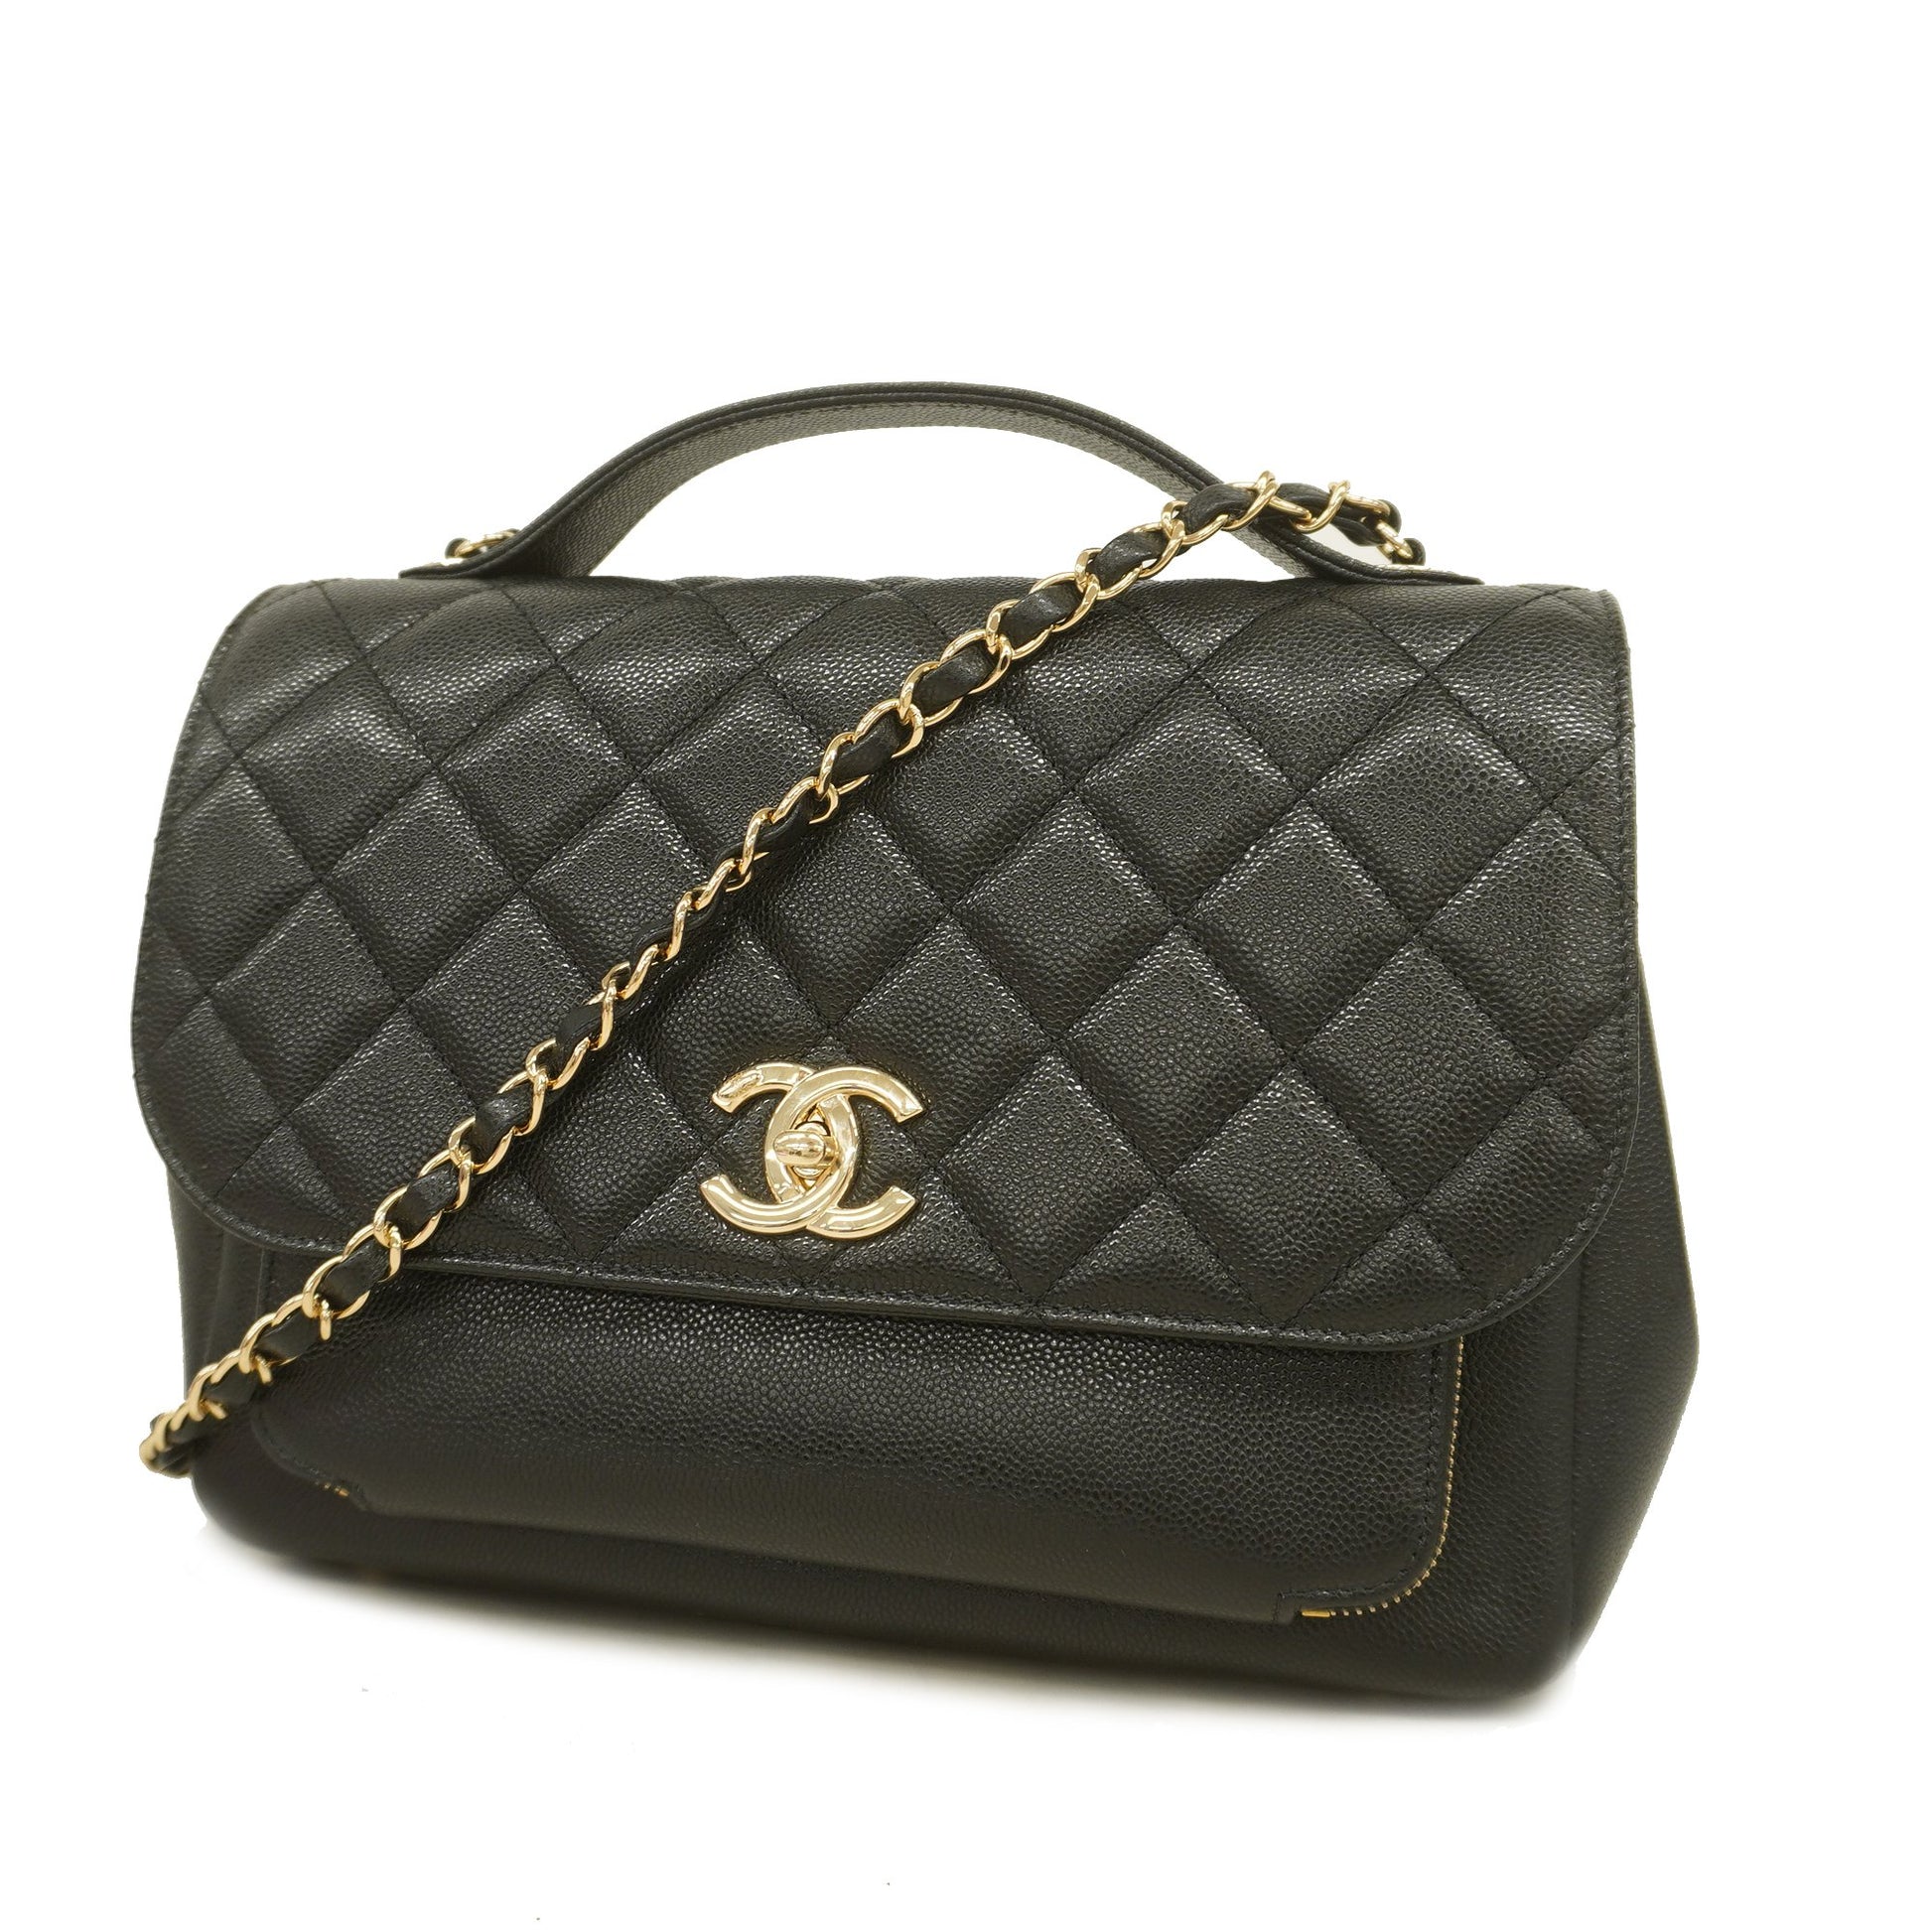 Chanel 2Way-bag Black Denim with Leather and Gold Hardware #TTLR-3